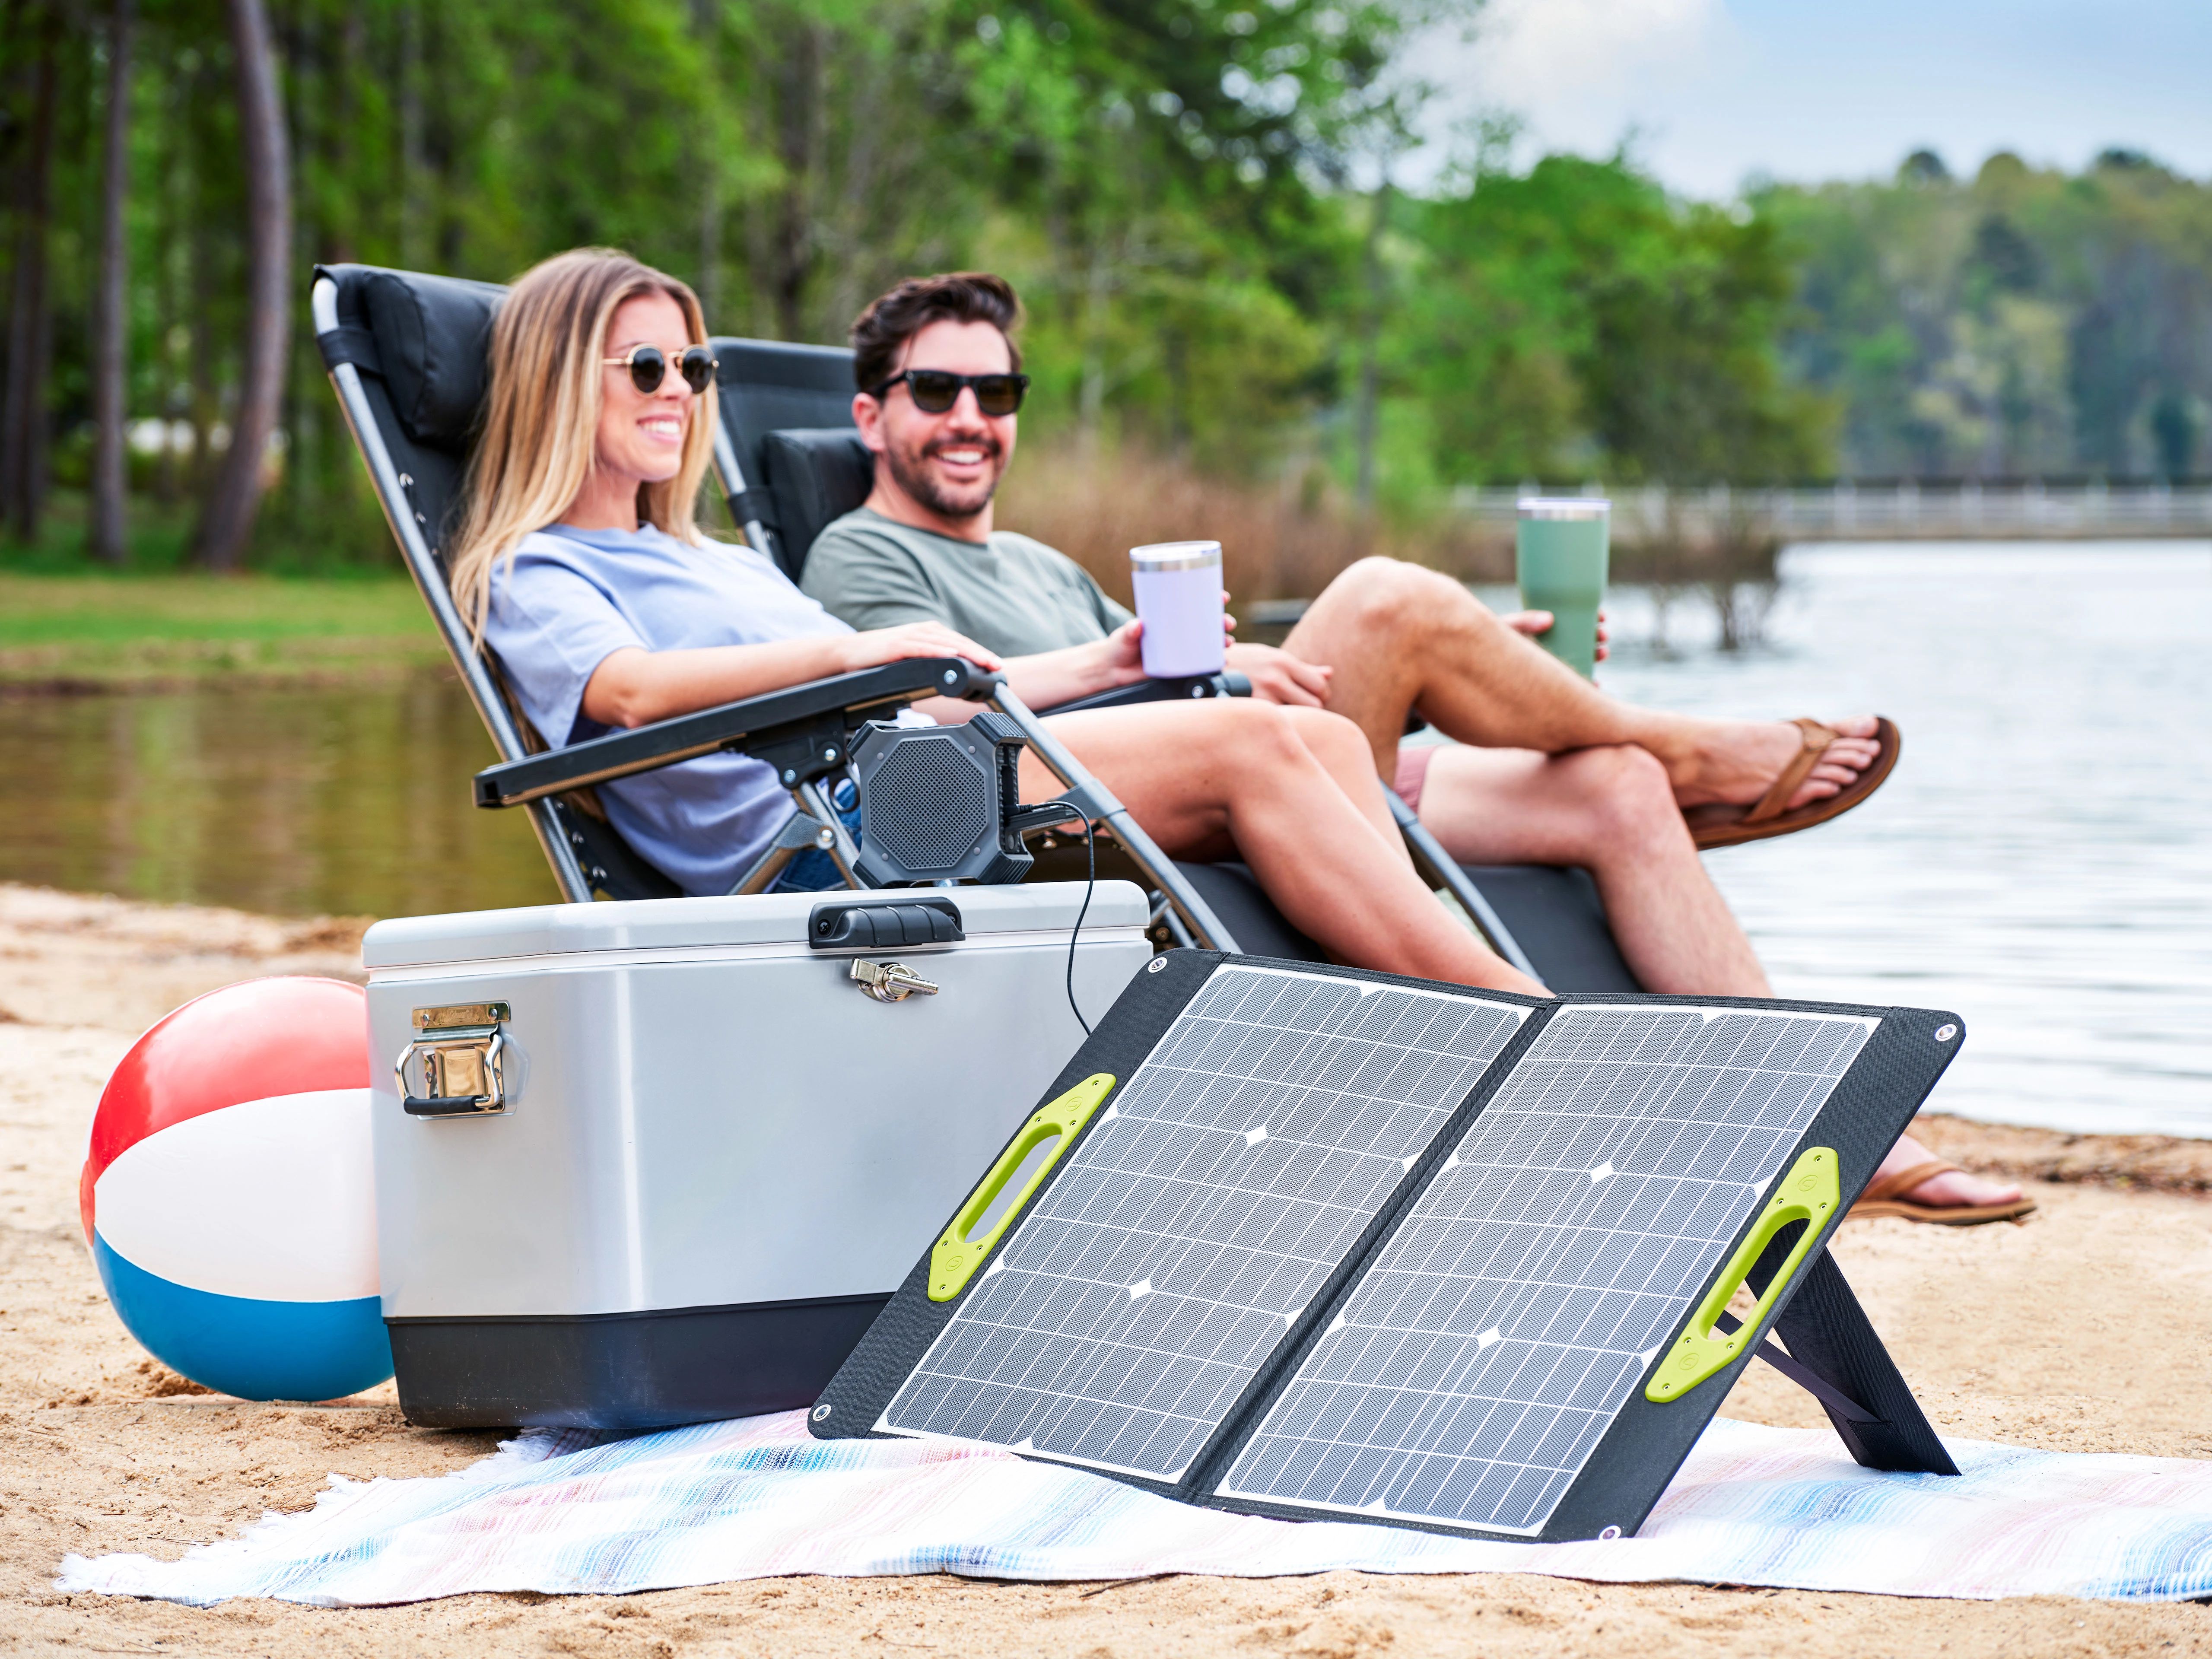 Use Anywhere Under the Sun Where You Could Need Portable Power